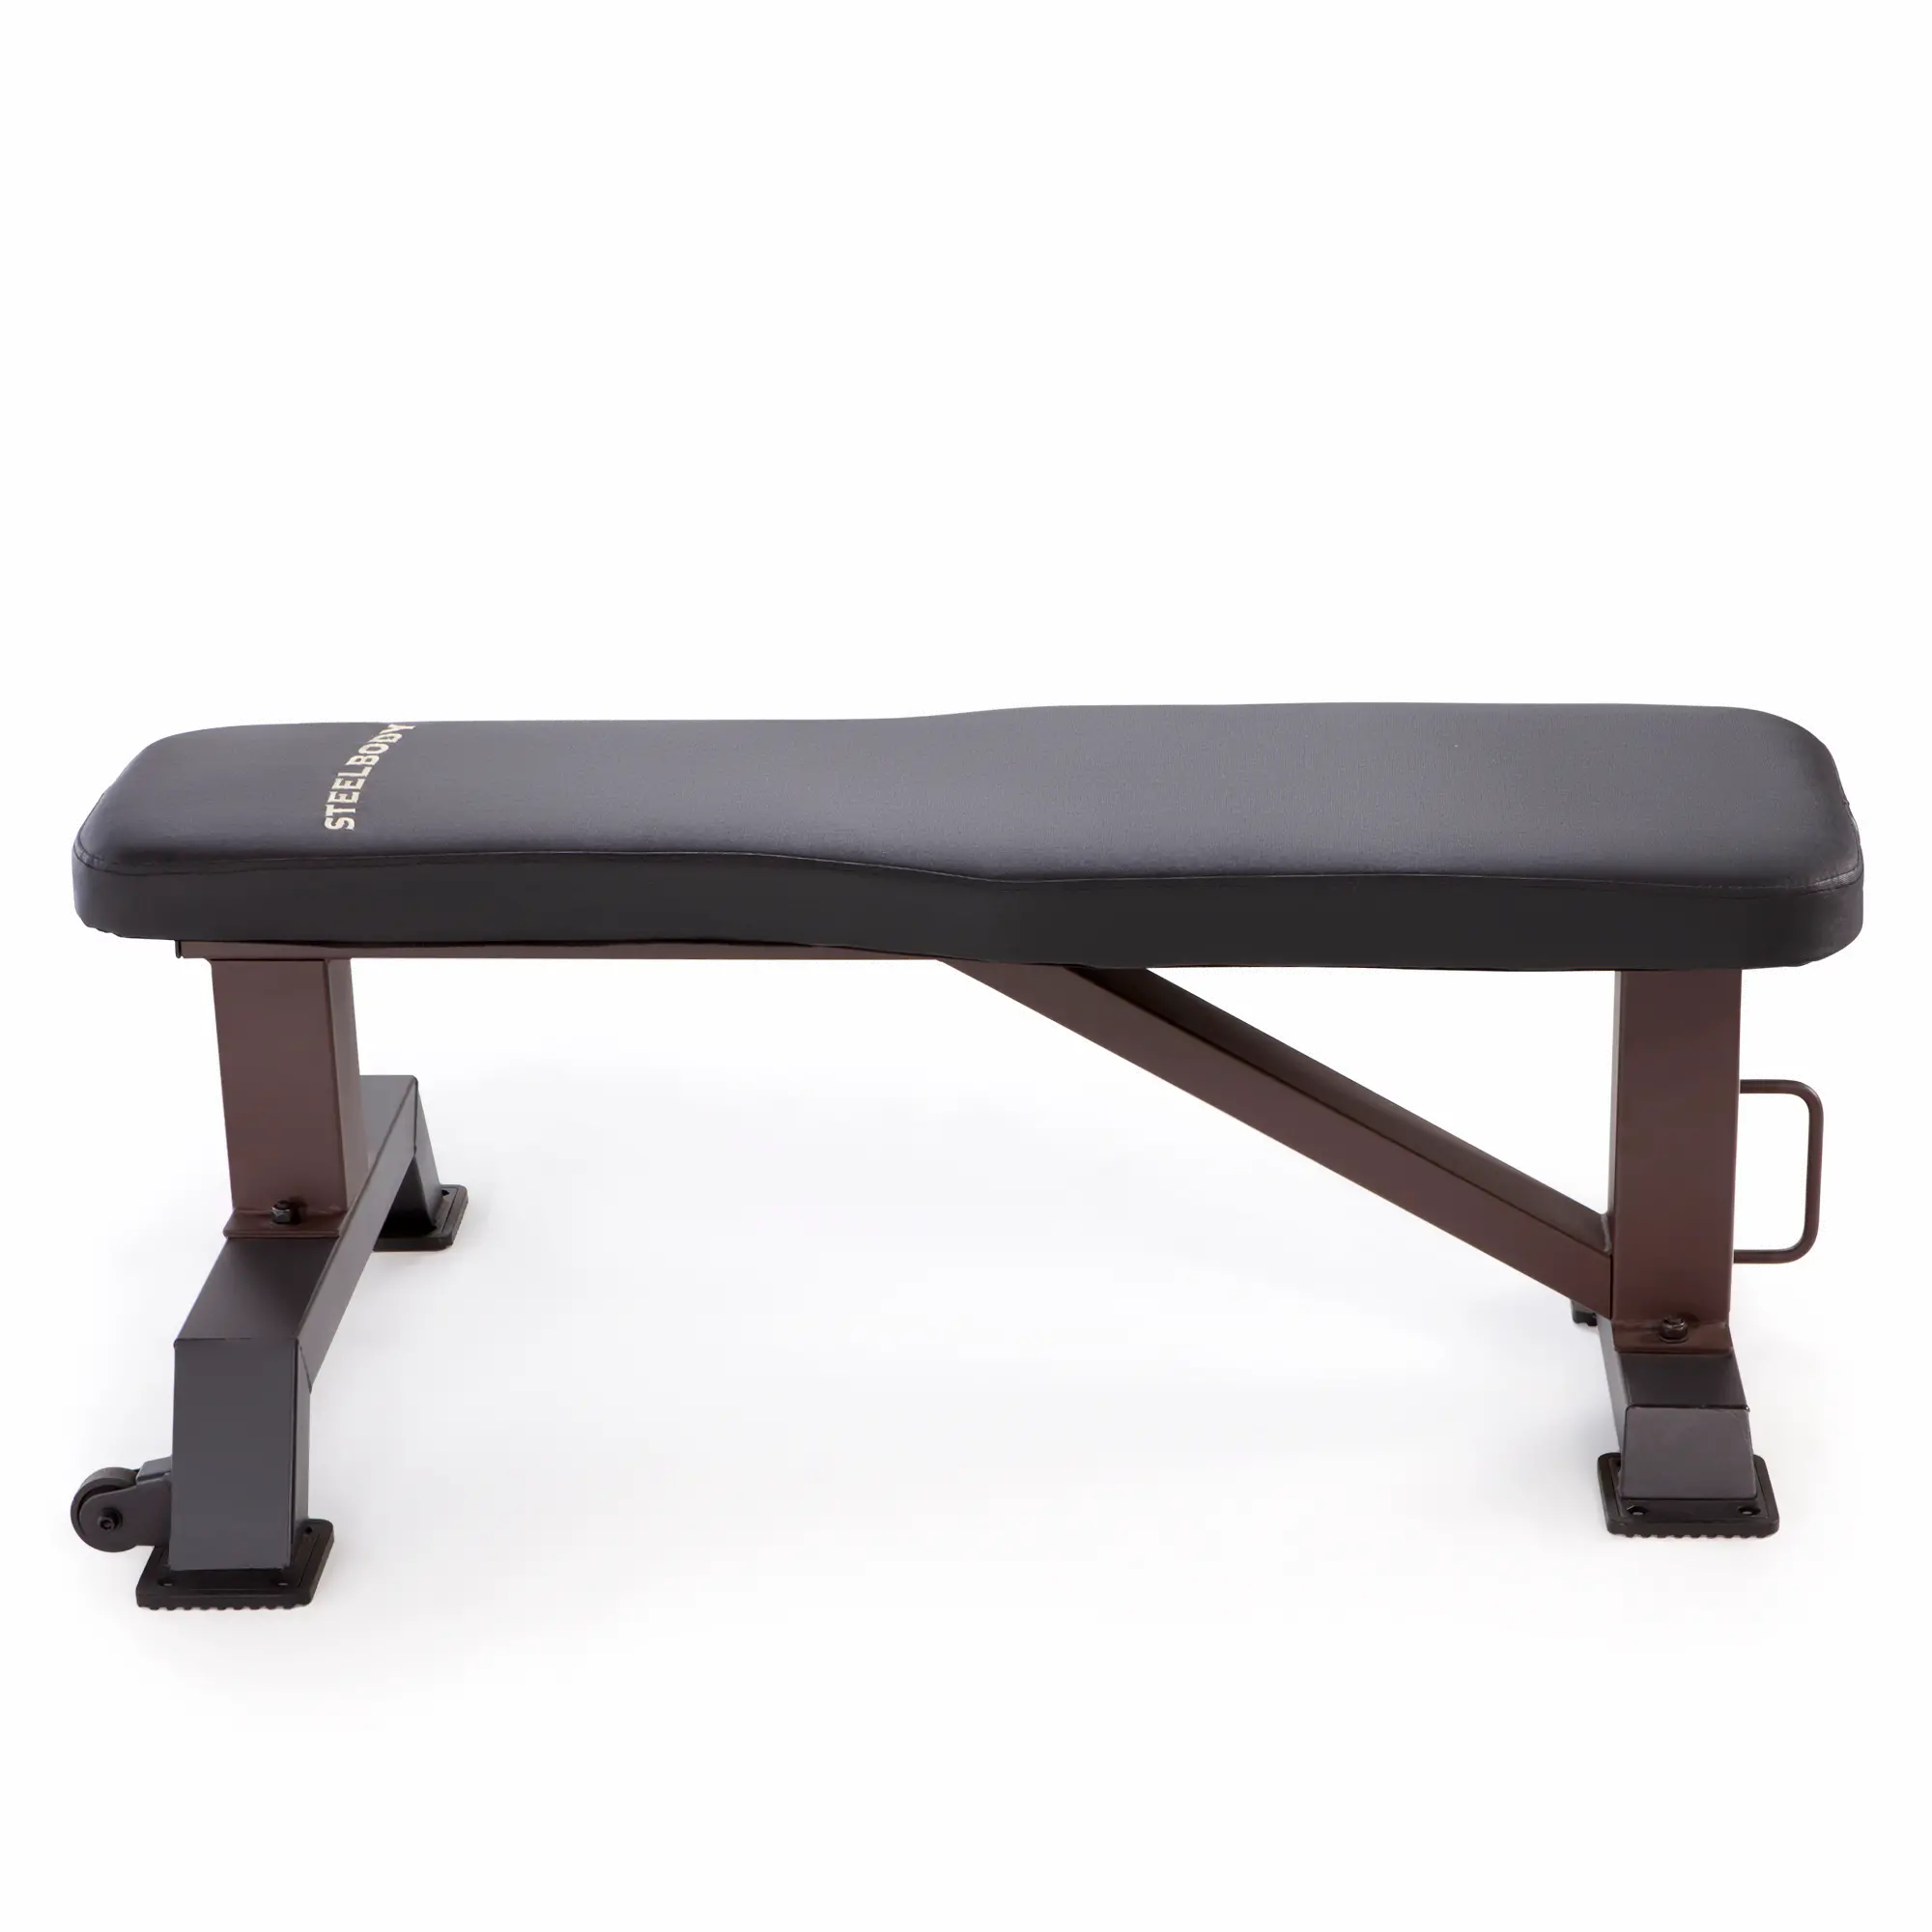 Photos - Weight Bench Impex Inc Steel Body Flat Utility Workout Bench STB-10101